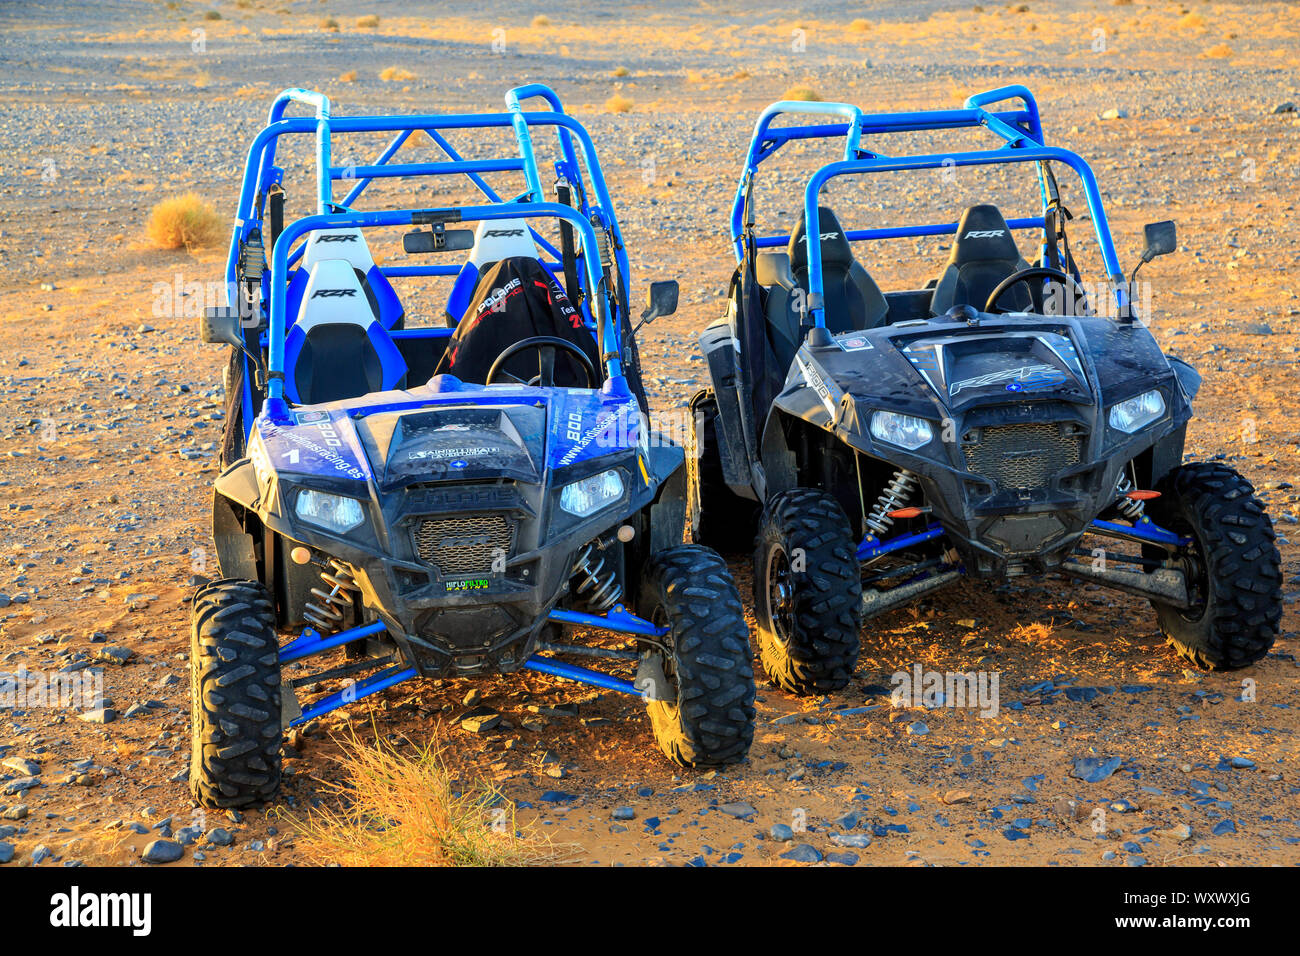 Merzouga, Morocco - Feb 25, 2016: Two blue Polaris RZR 800 without pilot in Morocco desert near Merzouga. Merzouga is famous for its dunes, the highes Stock Photo